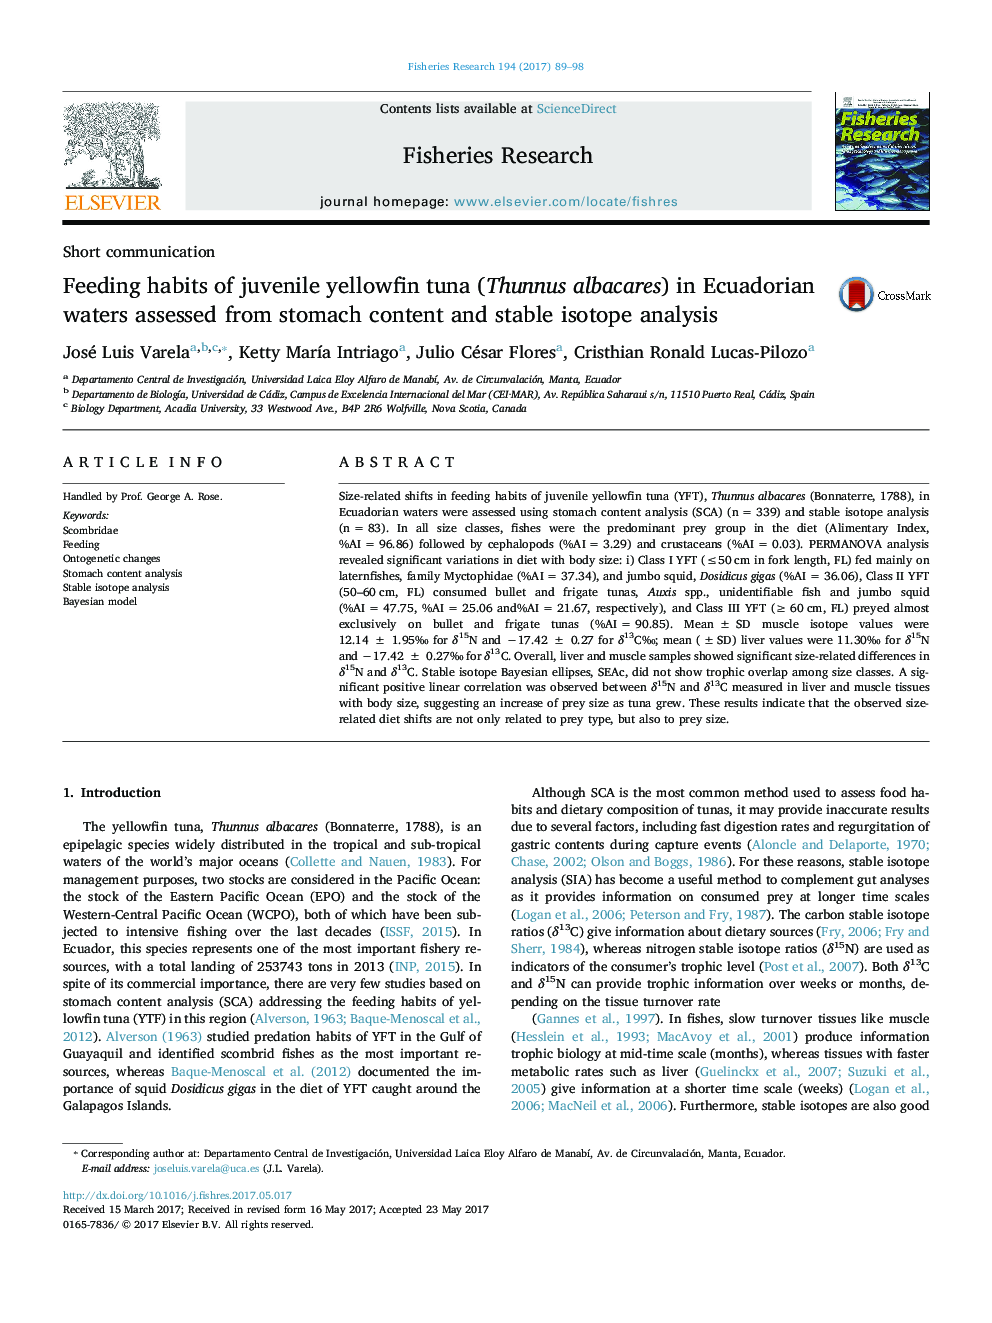 Feeding habits of juvenile yellowfin tuna (Thunnus albacares) in Ecuadorian waters assessed from stomach content and stable isotope analysis